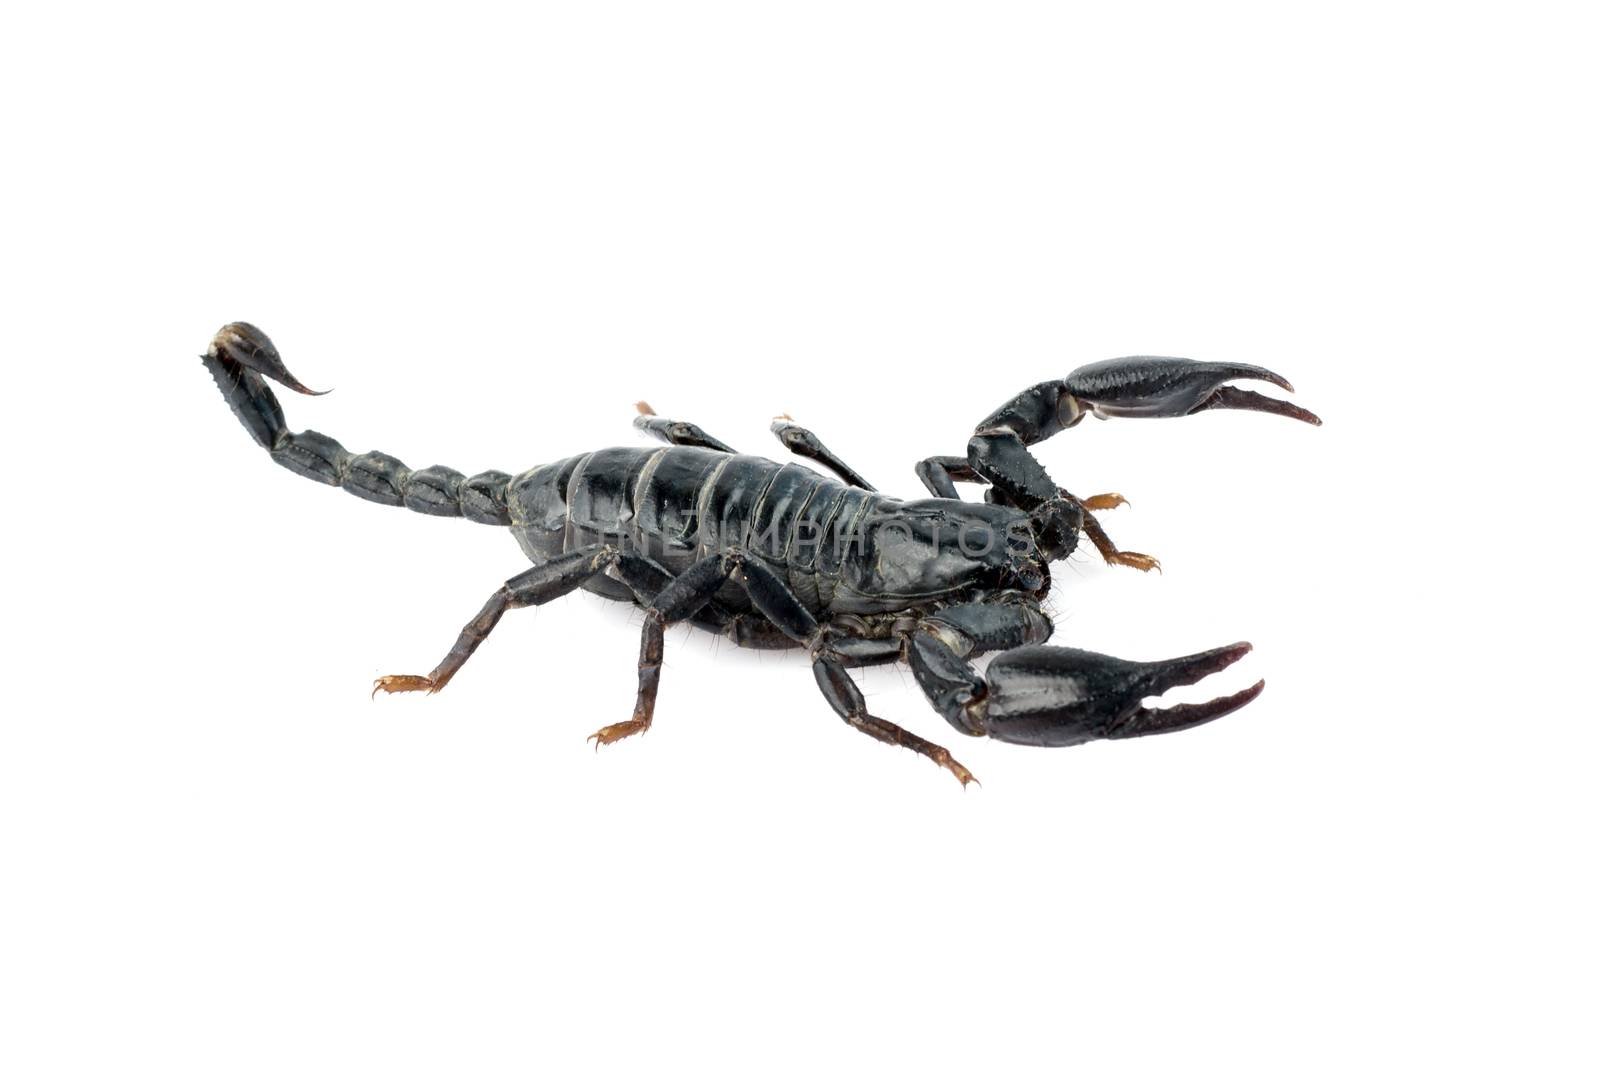 Image of scorpion on a white background. by yod67